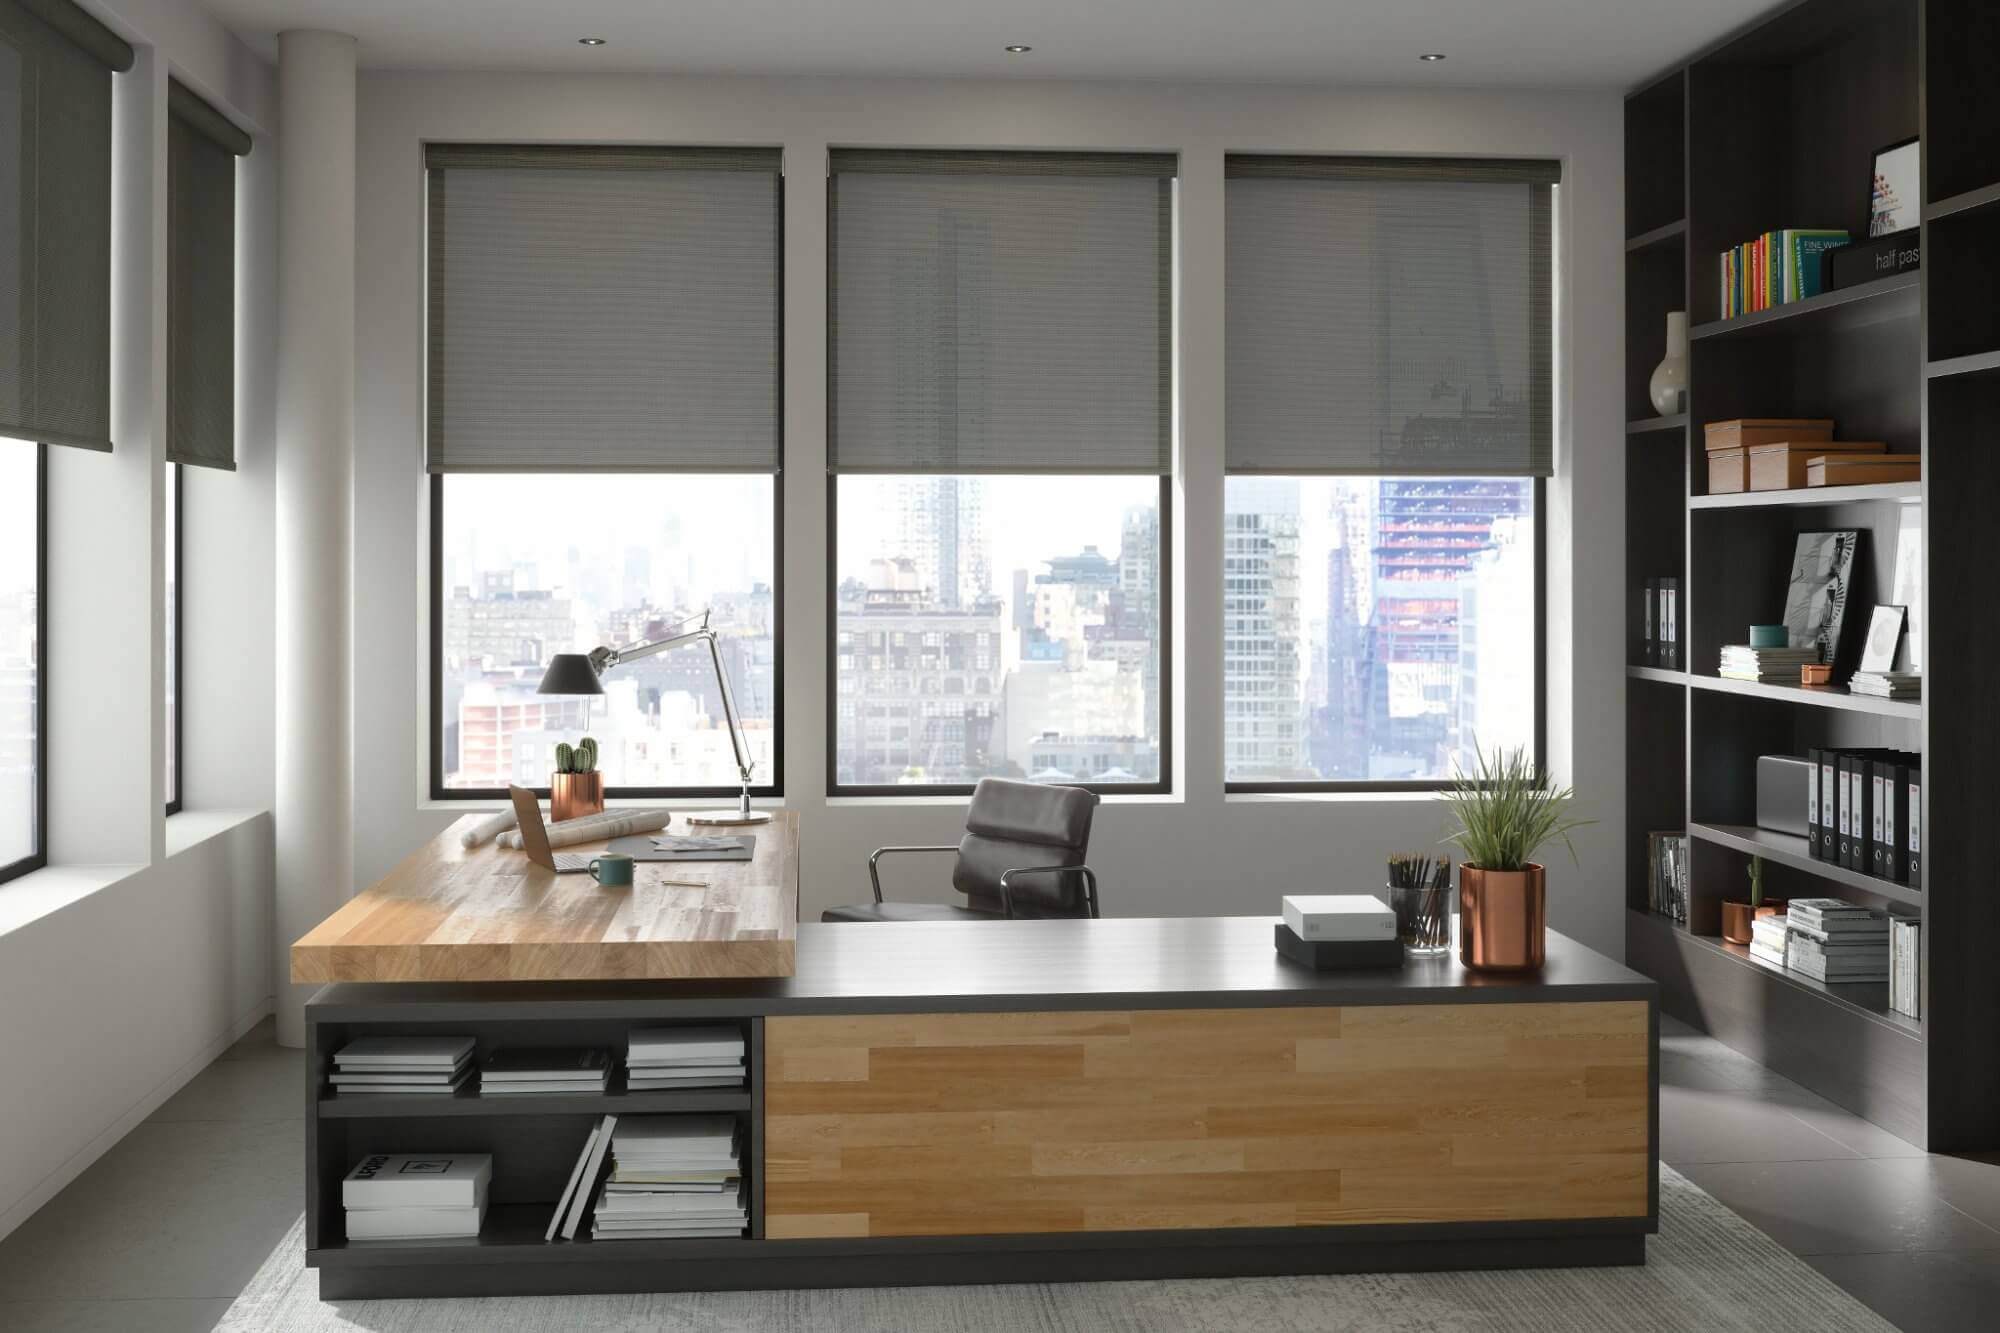 Window treatments in an office space need block unwanted glare or harsh light. 